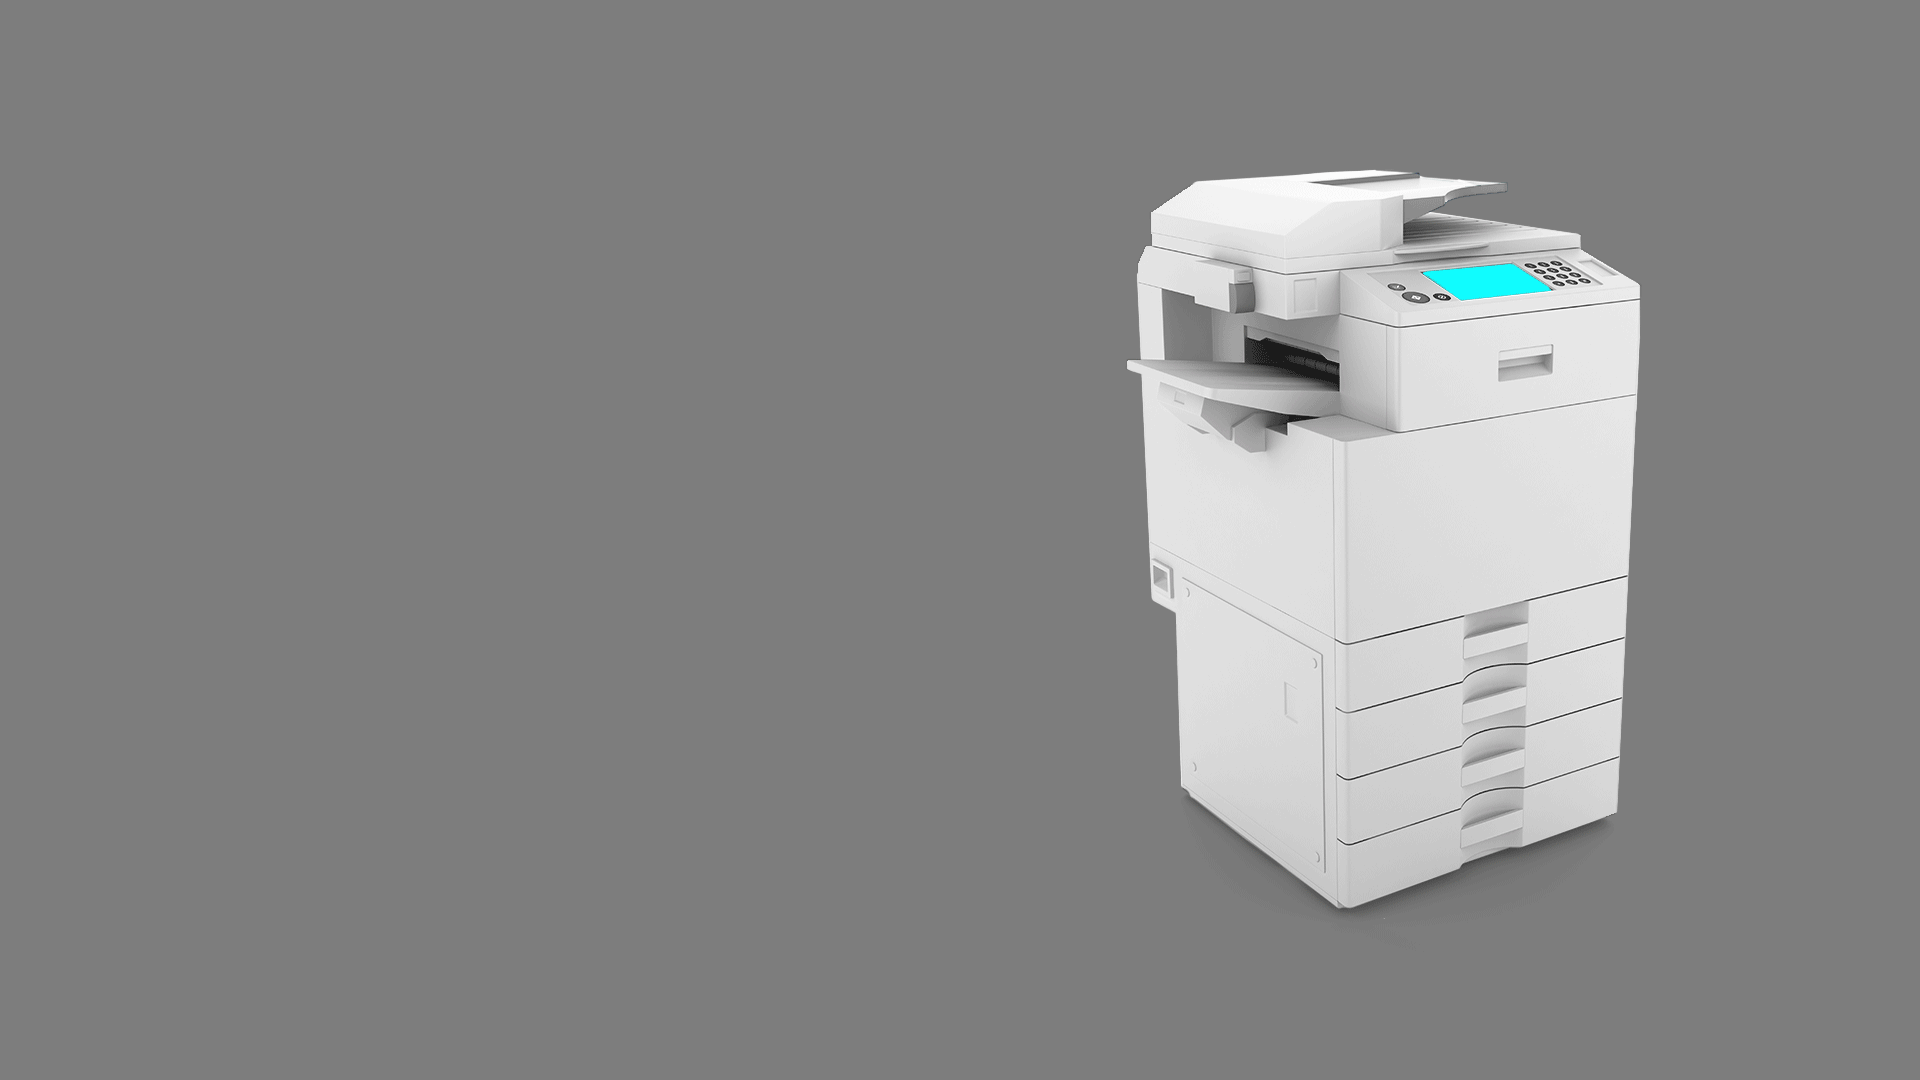 A copy machine spitting out Monopoly money